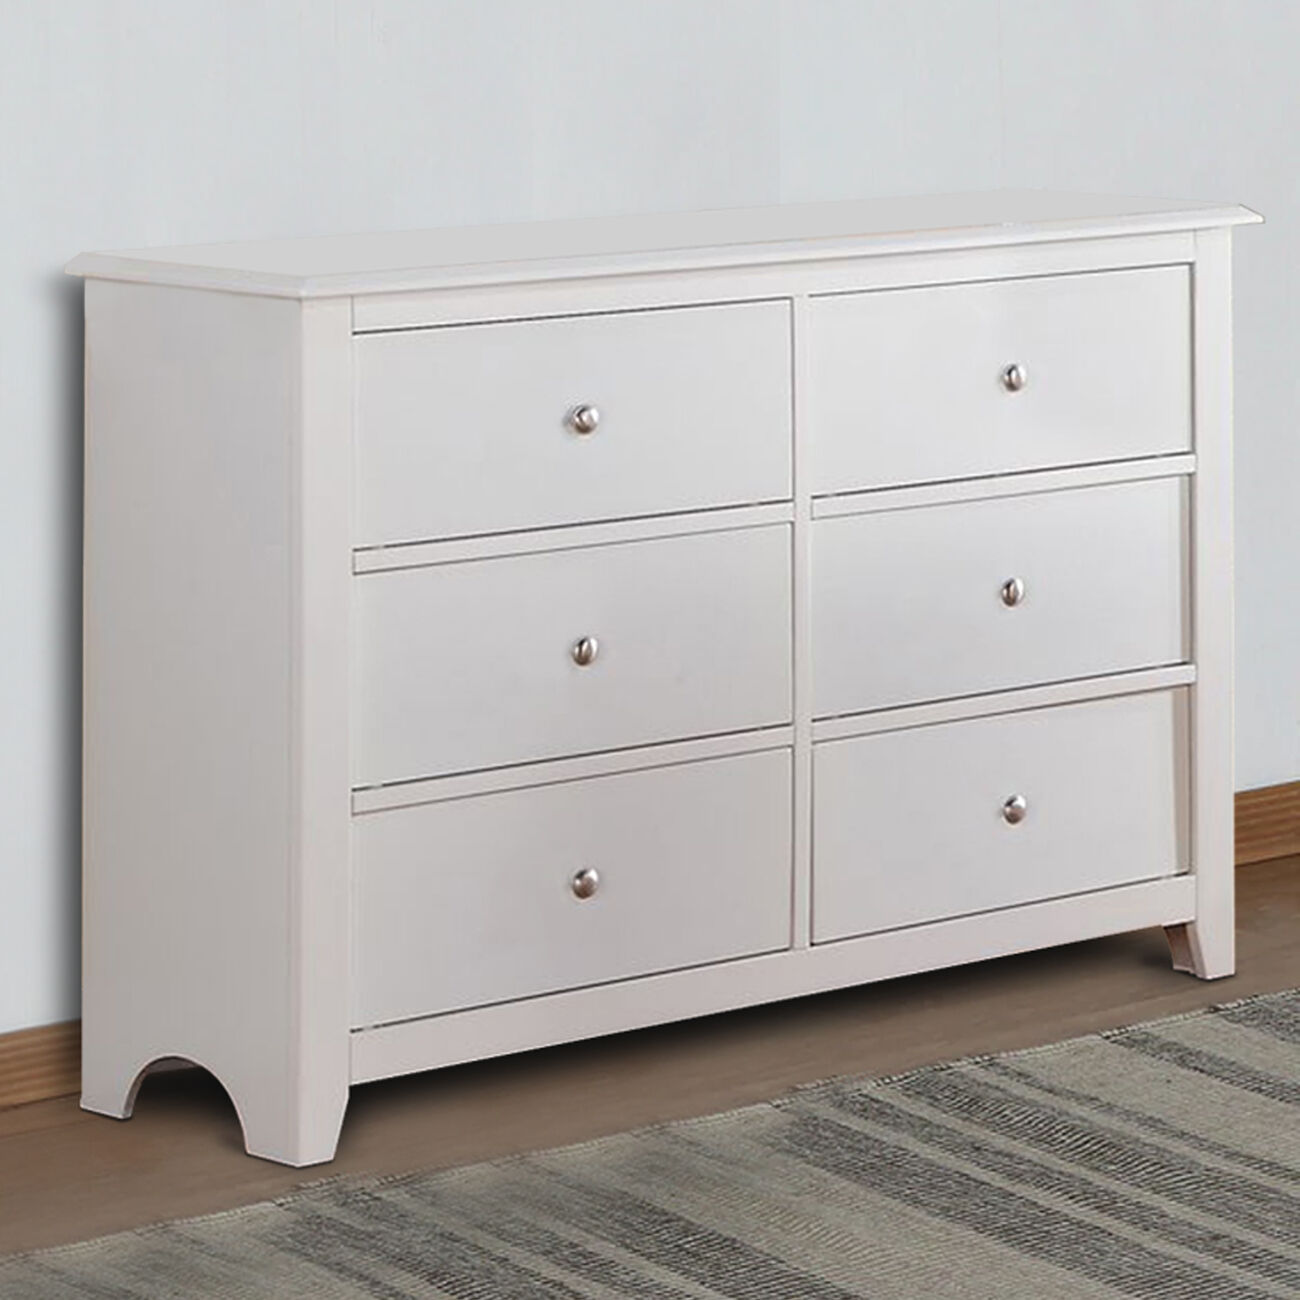 Pine Wood 6 Drawer Dresser With Silver Knobs, White